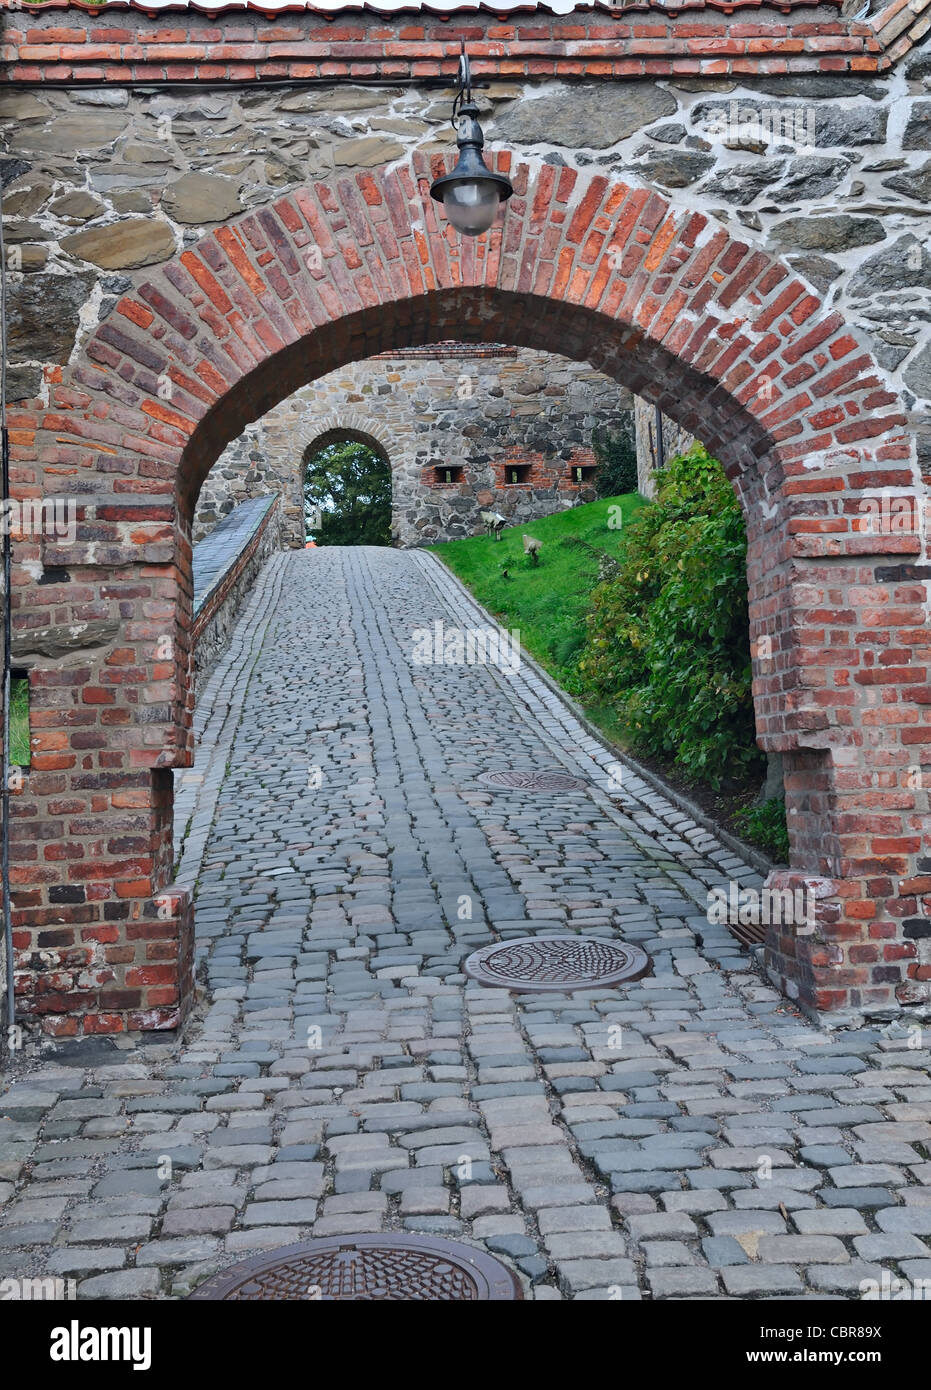 Oslo: fragments of the historical heritage of Norway - Fortress Akershus Stock Photo